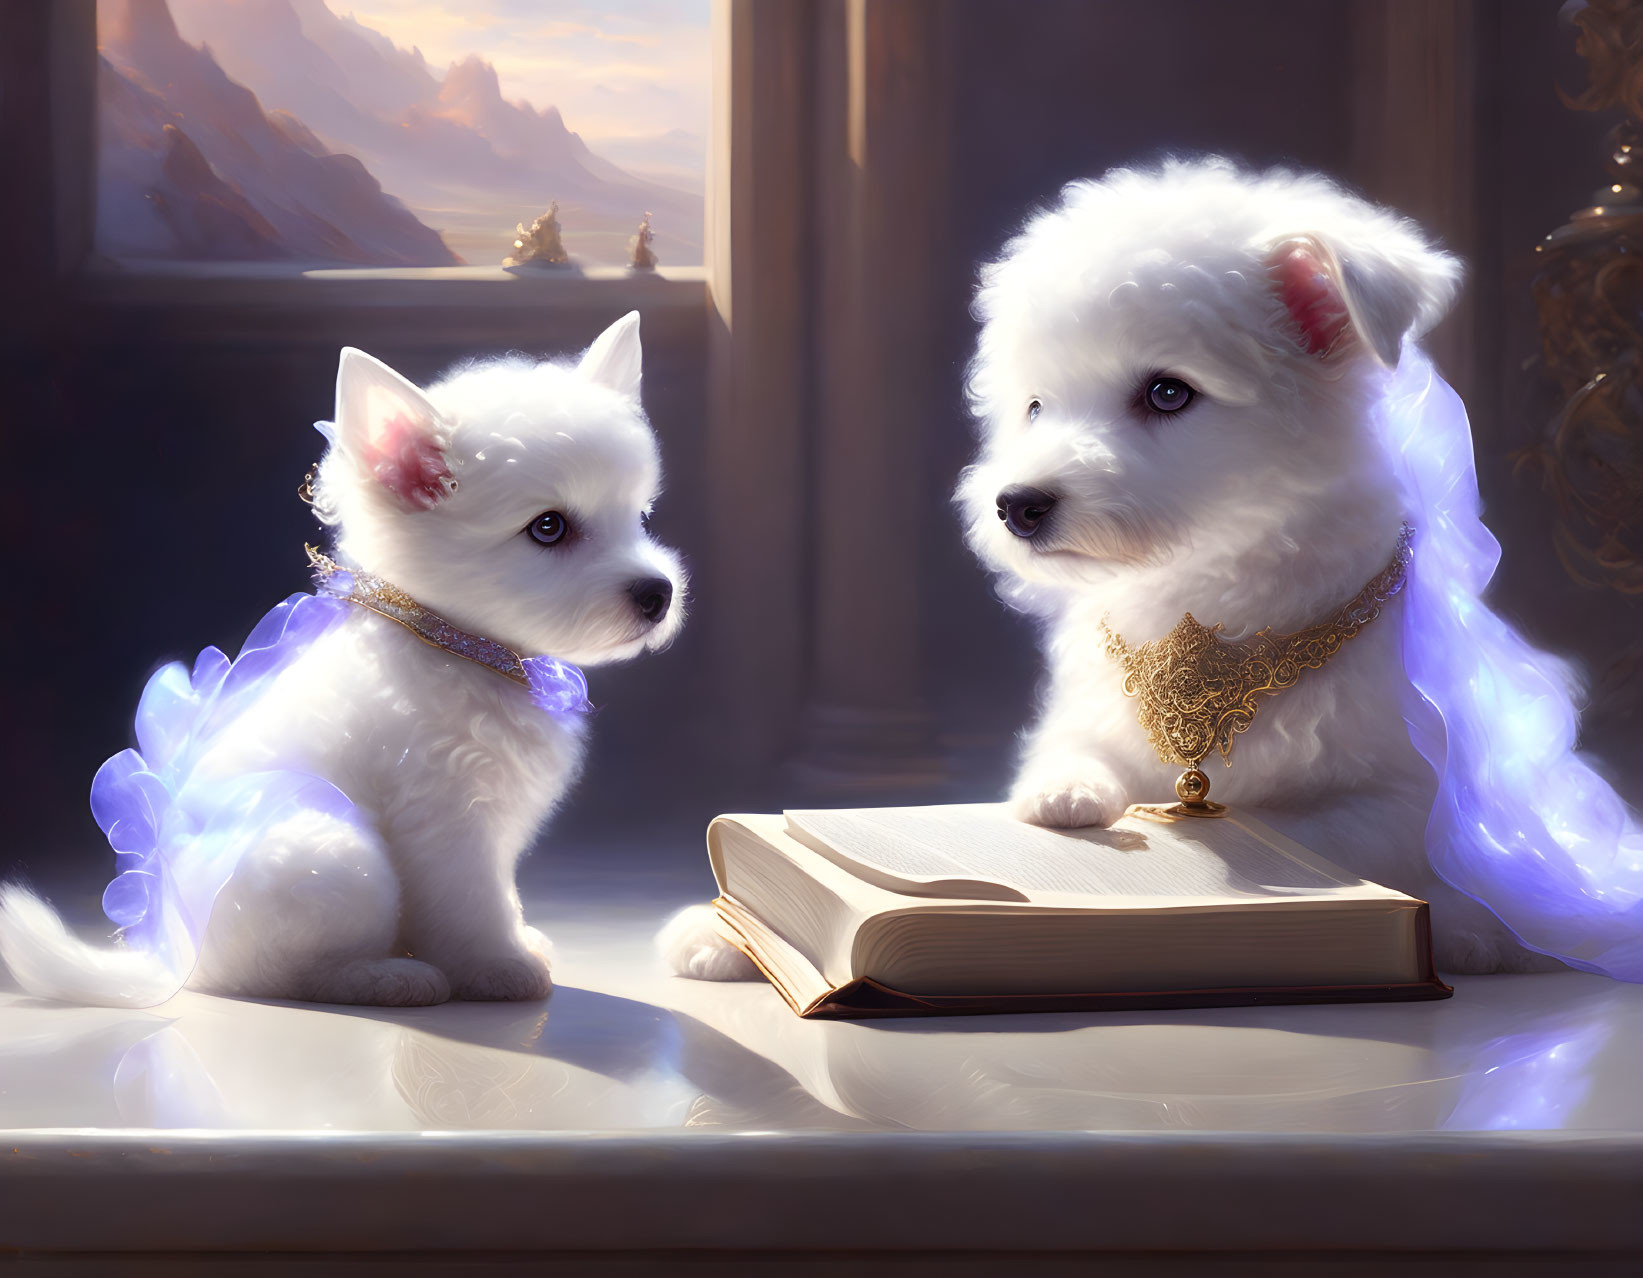 Fluffy white puppies with fantasy elements in majestic setting